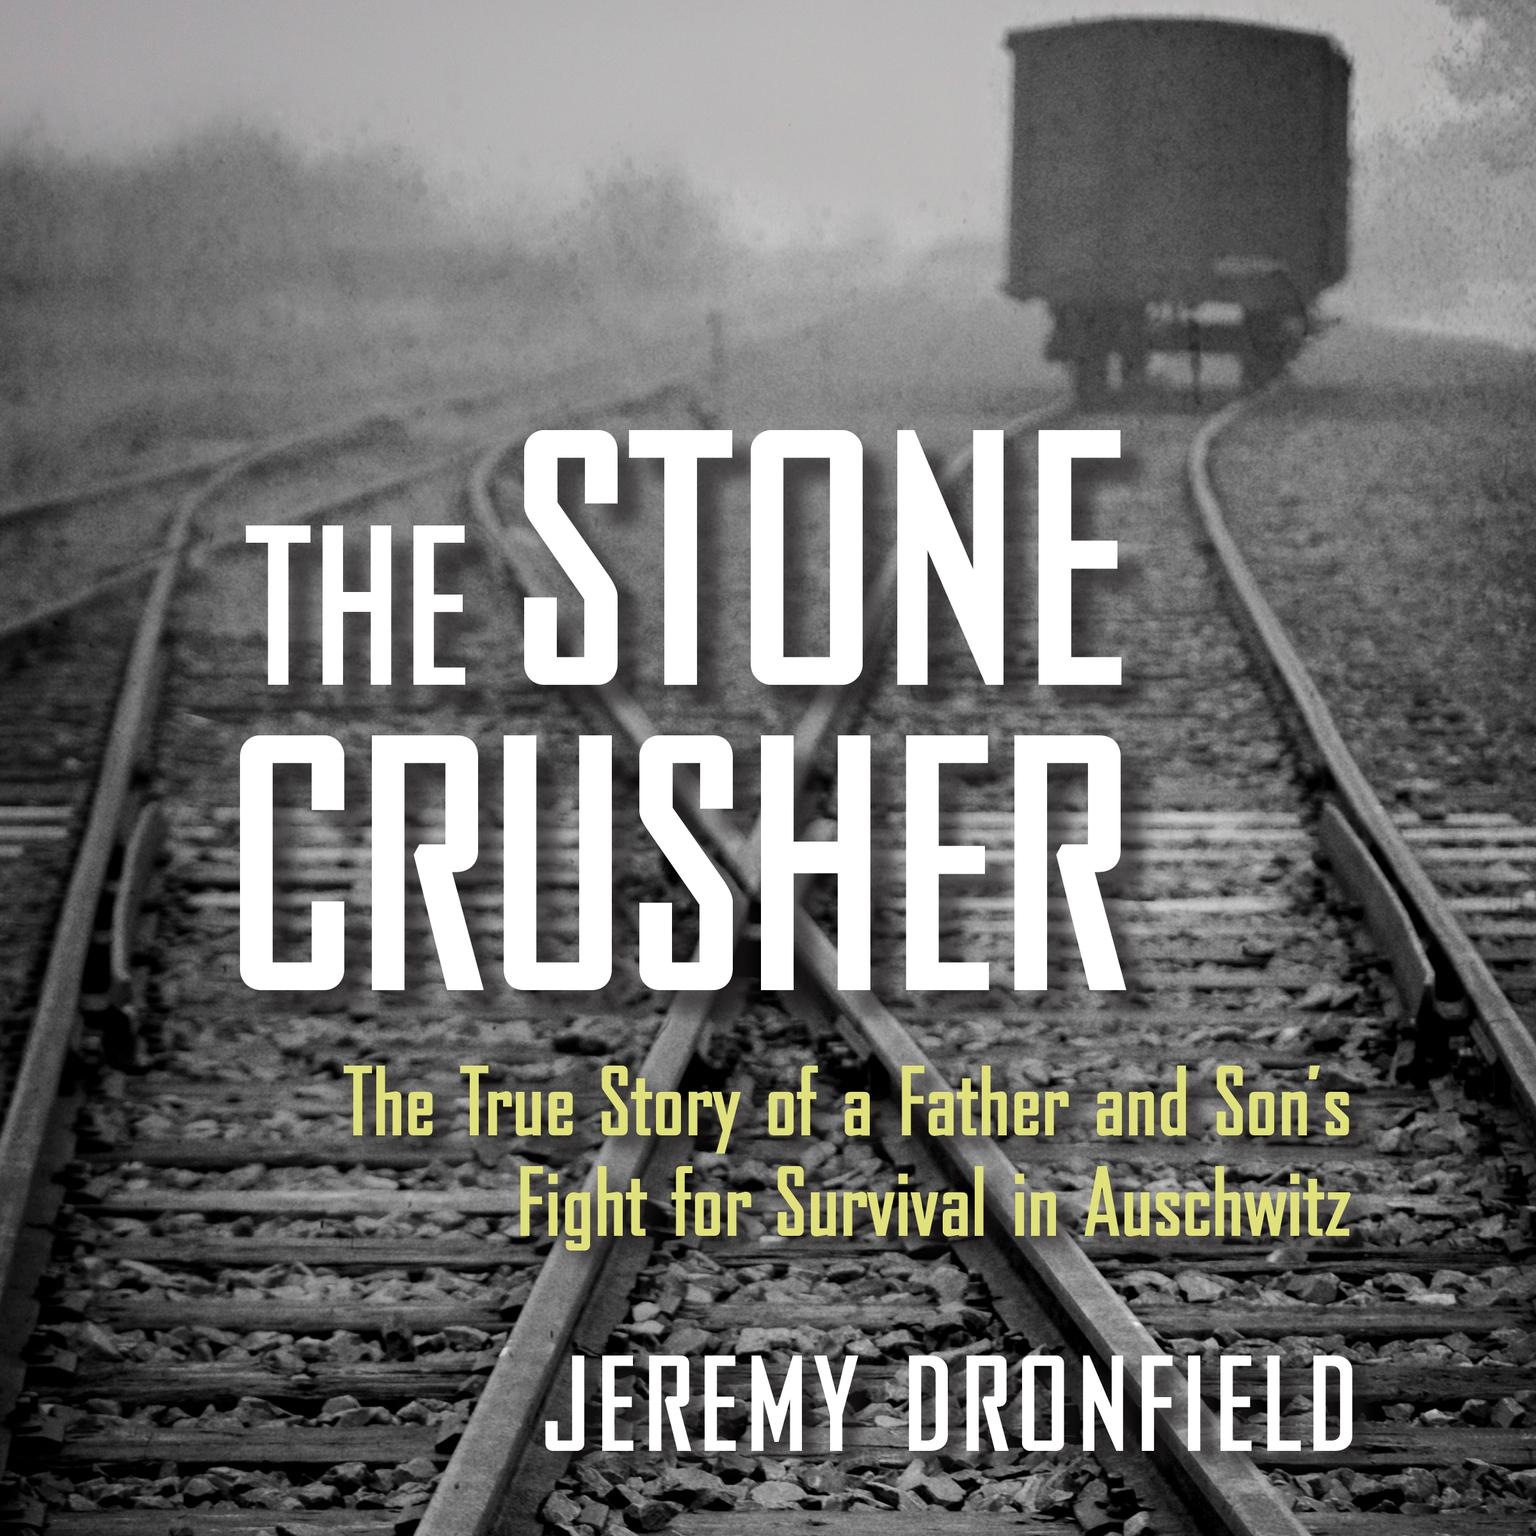 The Stone Crusher: The True Story of a Father and Sons Fight for Survival in Auschwitz Audiobook, by Jeremy Dronfield